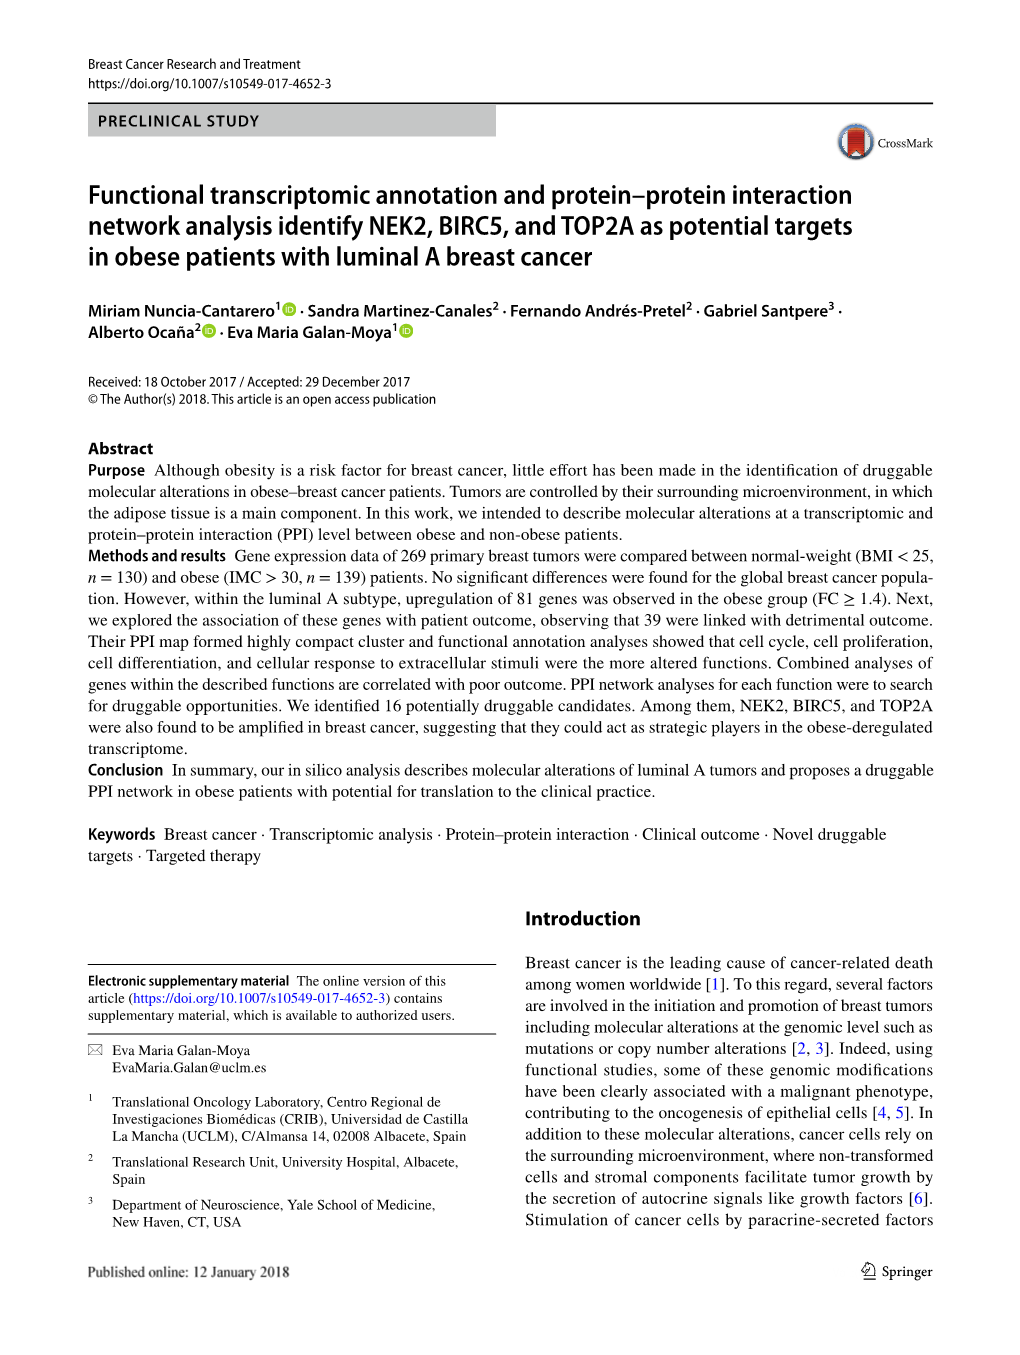 Functional Transcriptomic Annotation and Protein–Protein Interaction